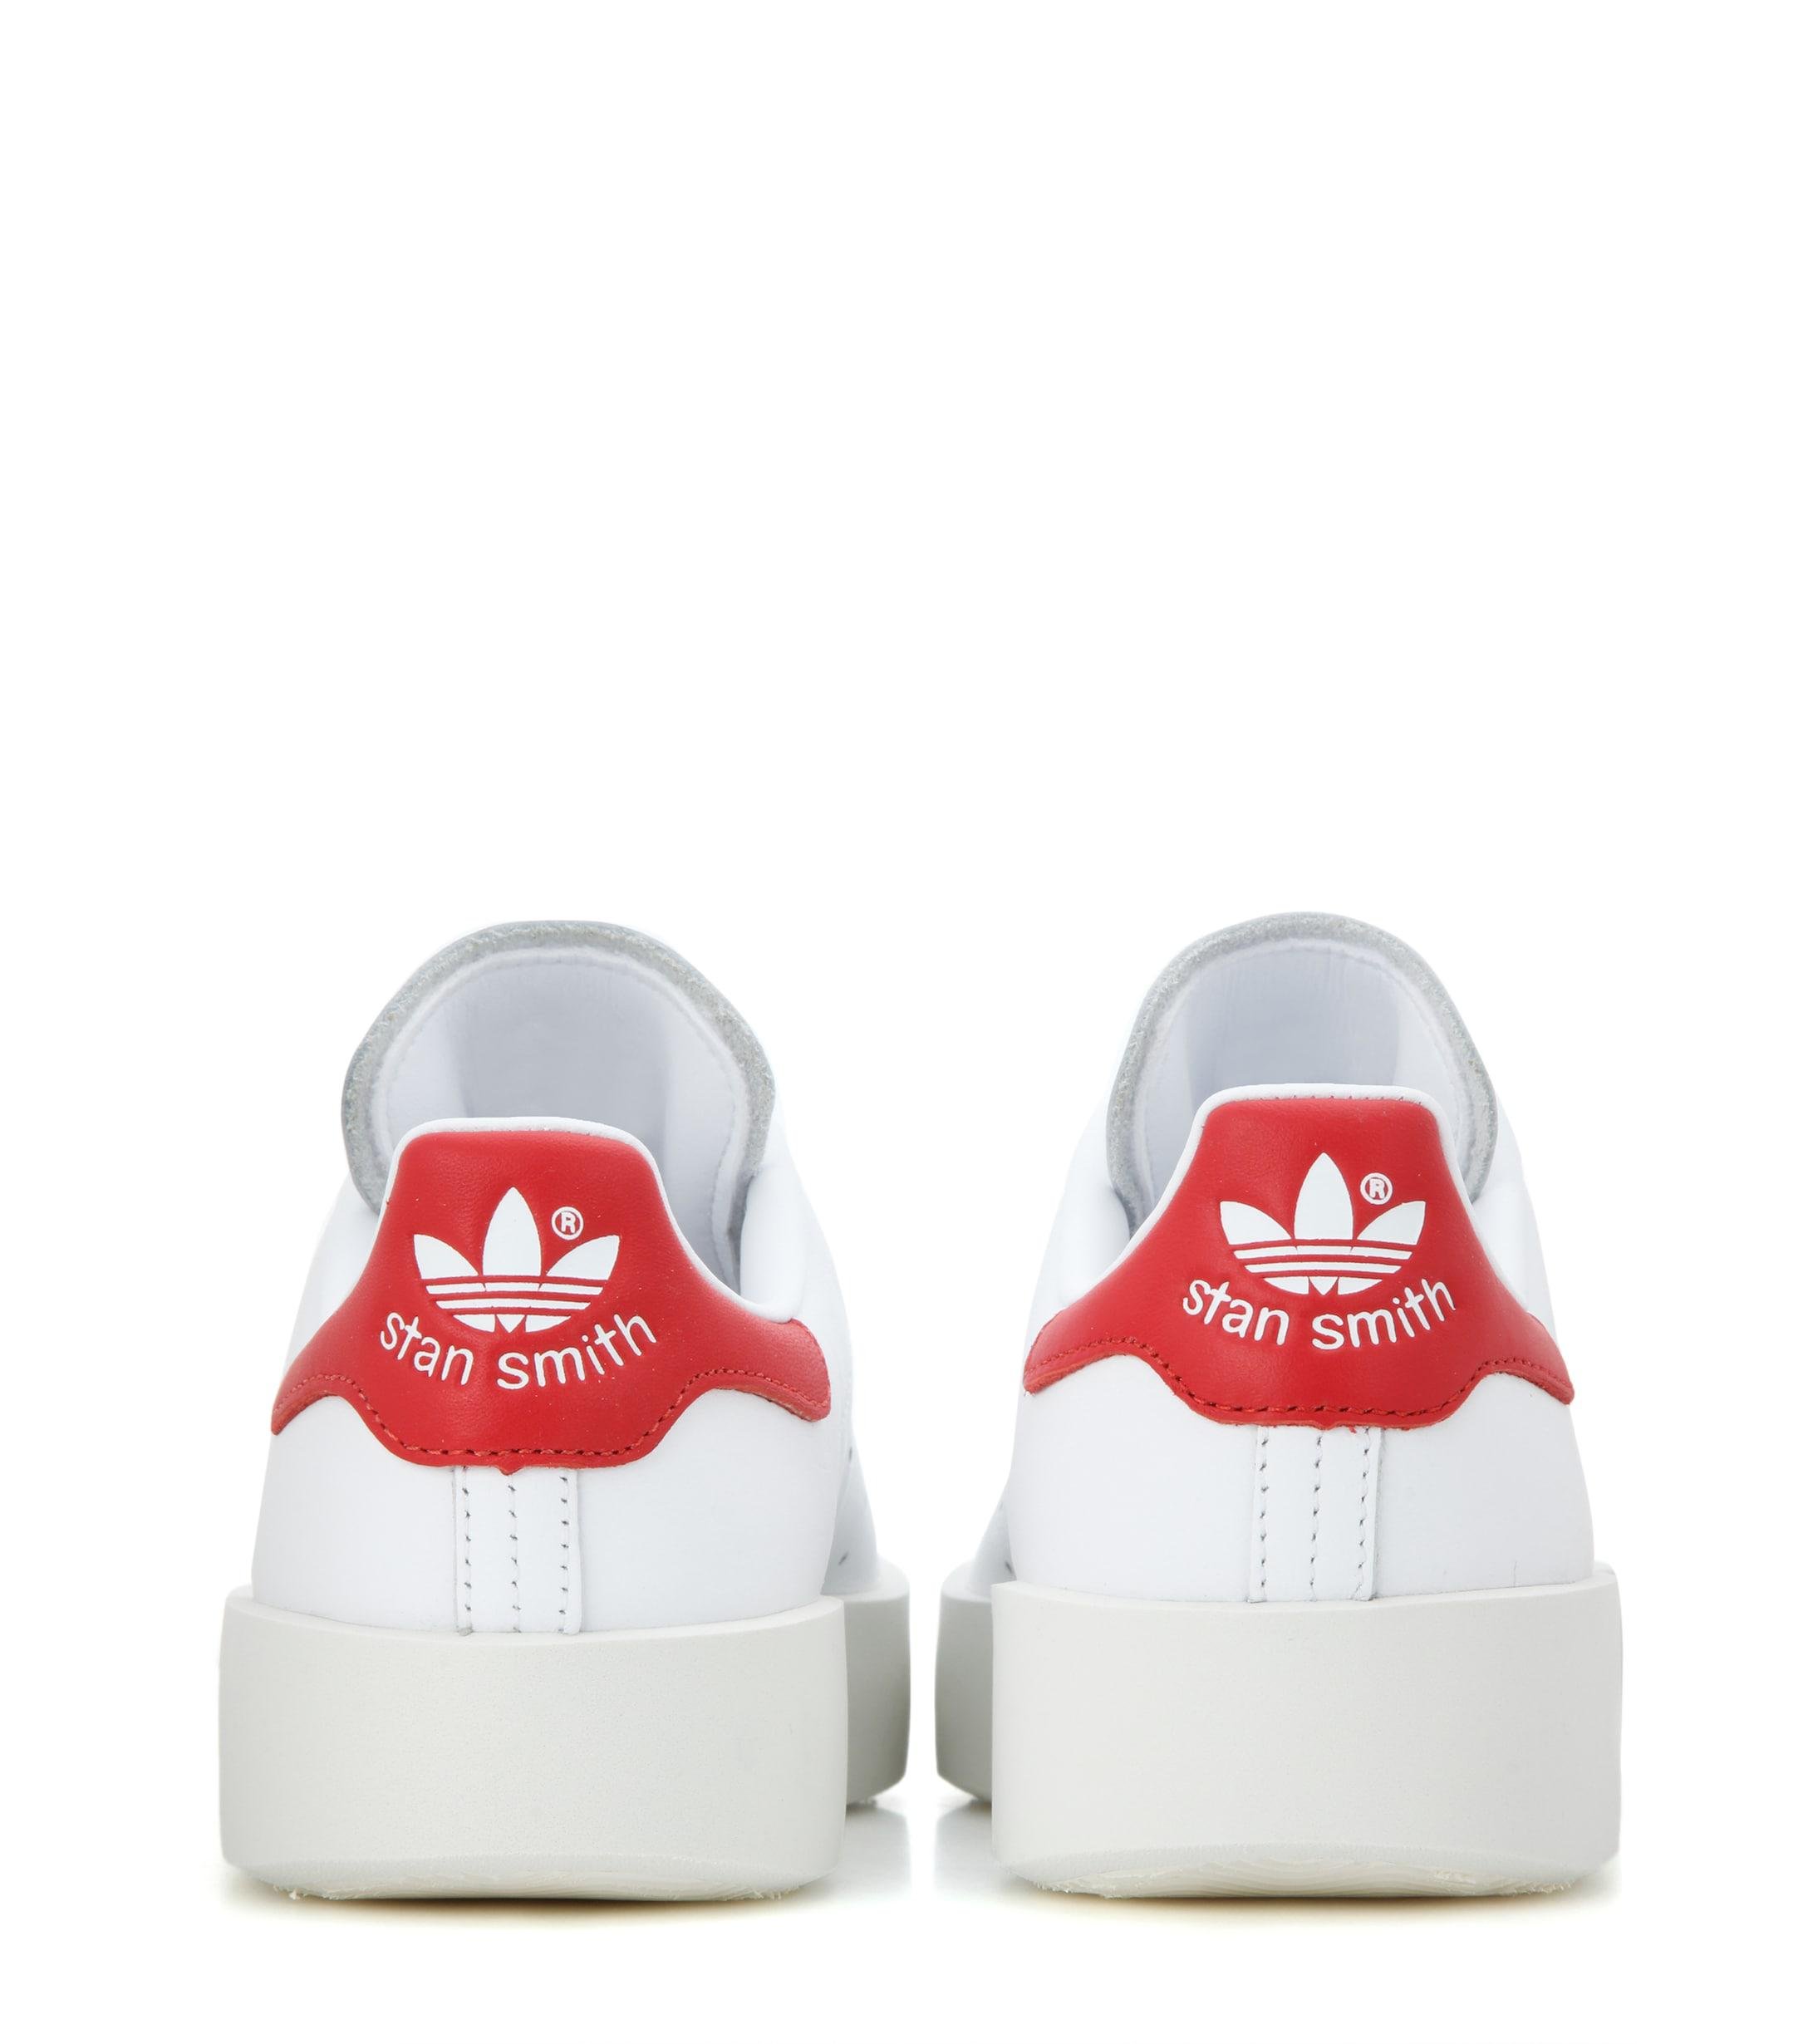 adidas Originals Leather Stan Smith Trainers With Red Heart in White | Lyst